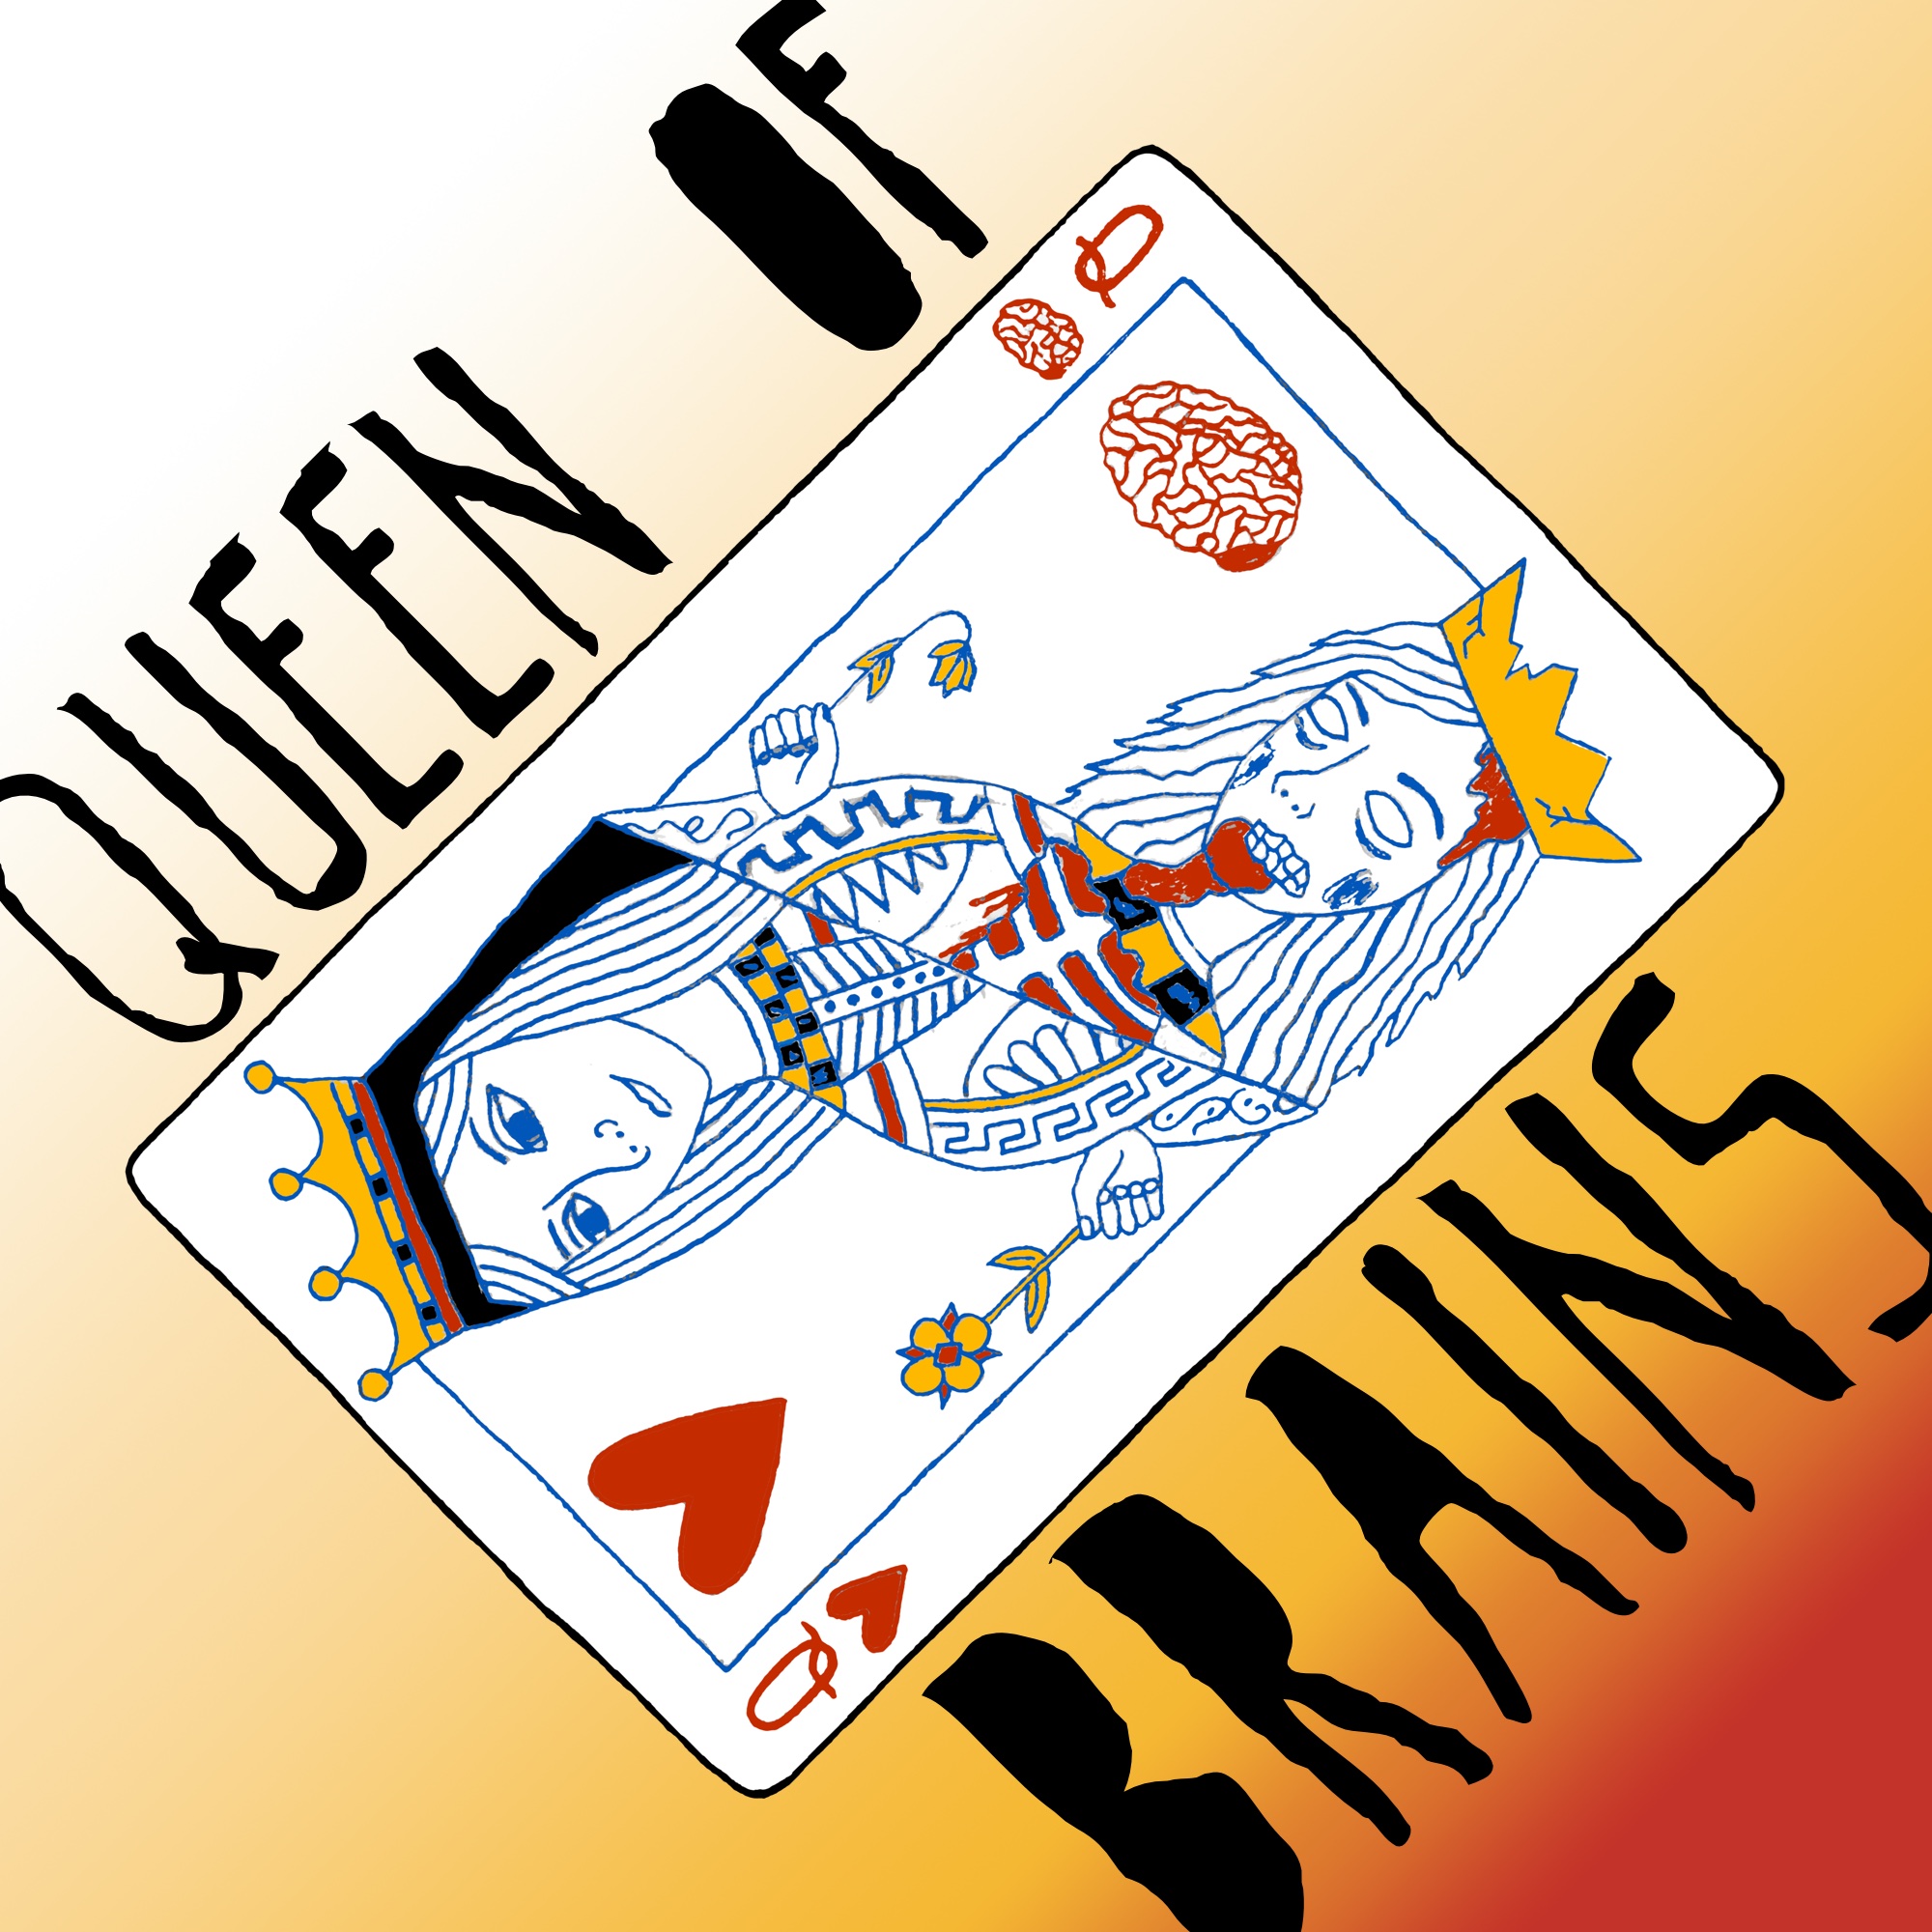 Queen of Brains Podcast